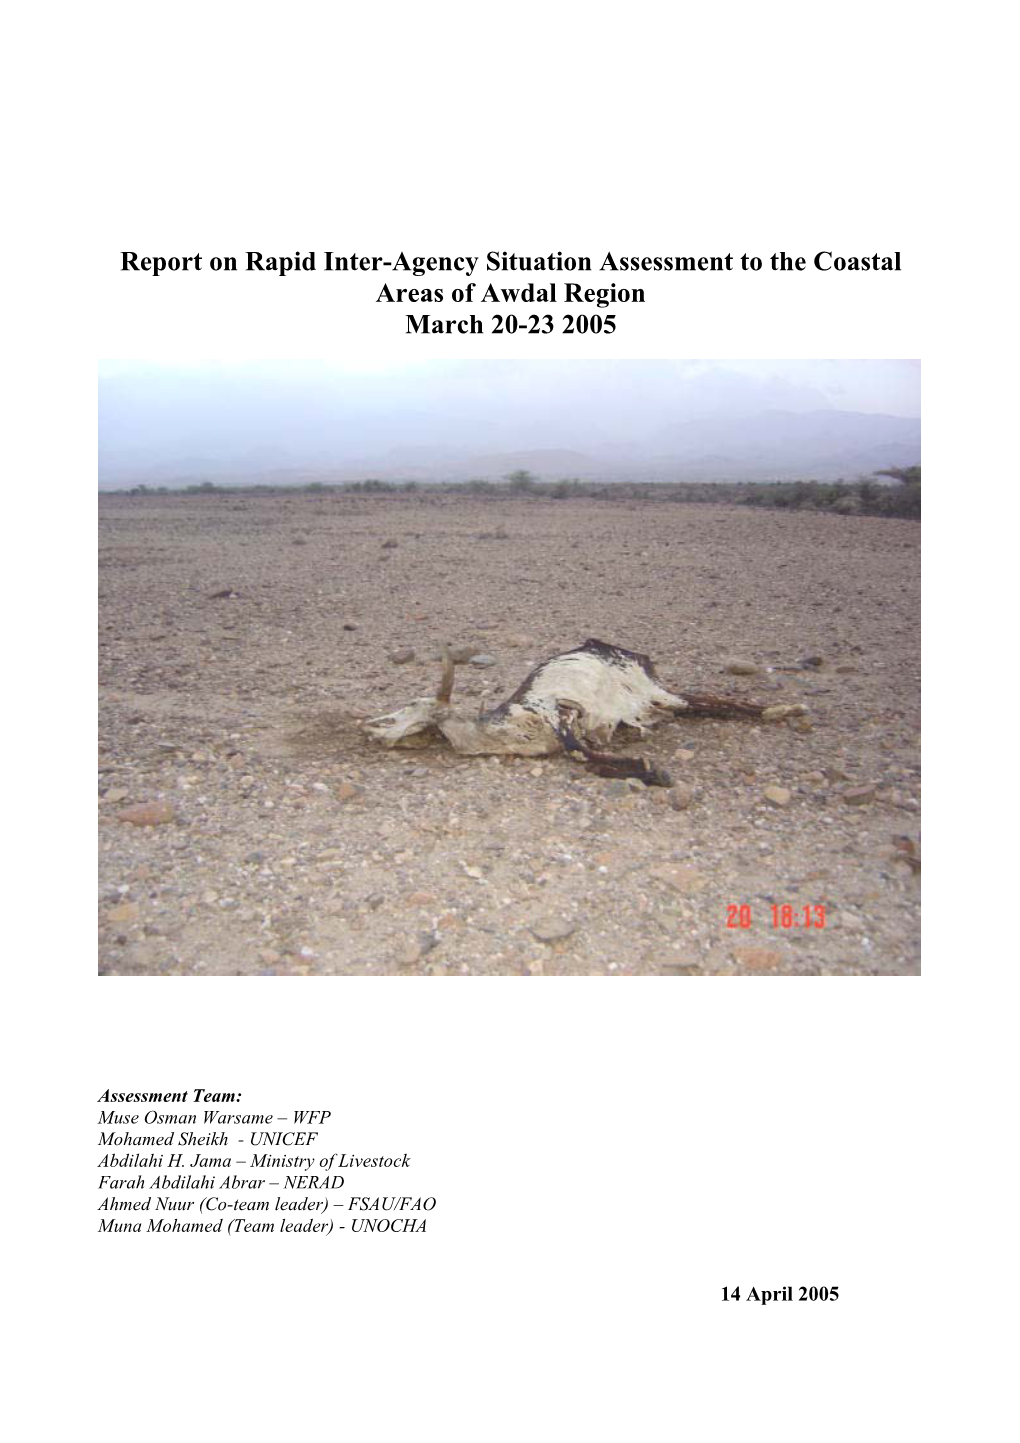 Report on Rapid Inter-Agency Situation Assessment to the Coastal Areas of Awdal Region March 20-23 2005